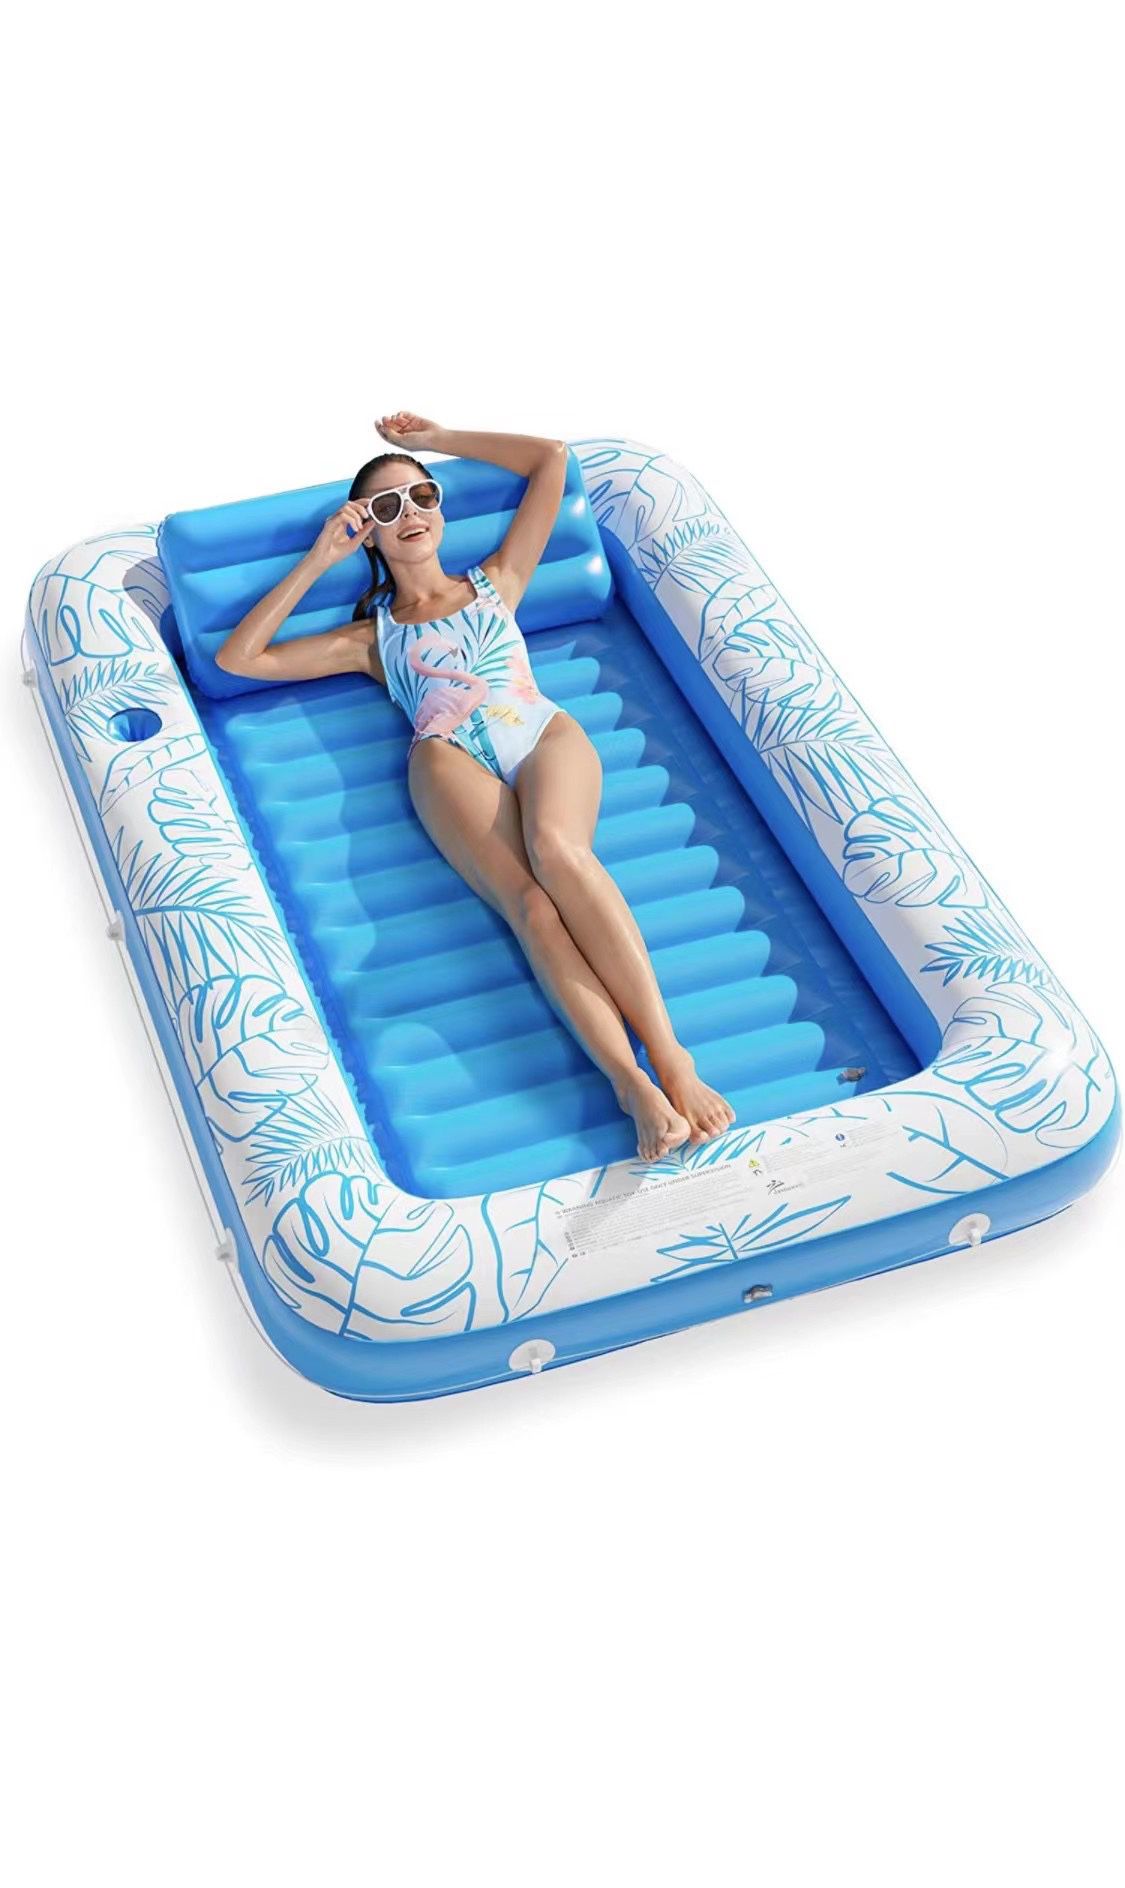 Inflatable Tanning Pool Lounger Float - 4 in 1 Sun Tan Tub Sunbathing Pool Lounge Raft Floatie Toys Water Filled Tanning Bed Mat Pad for Adult Blow Up